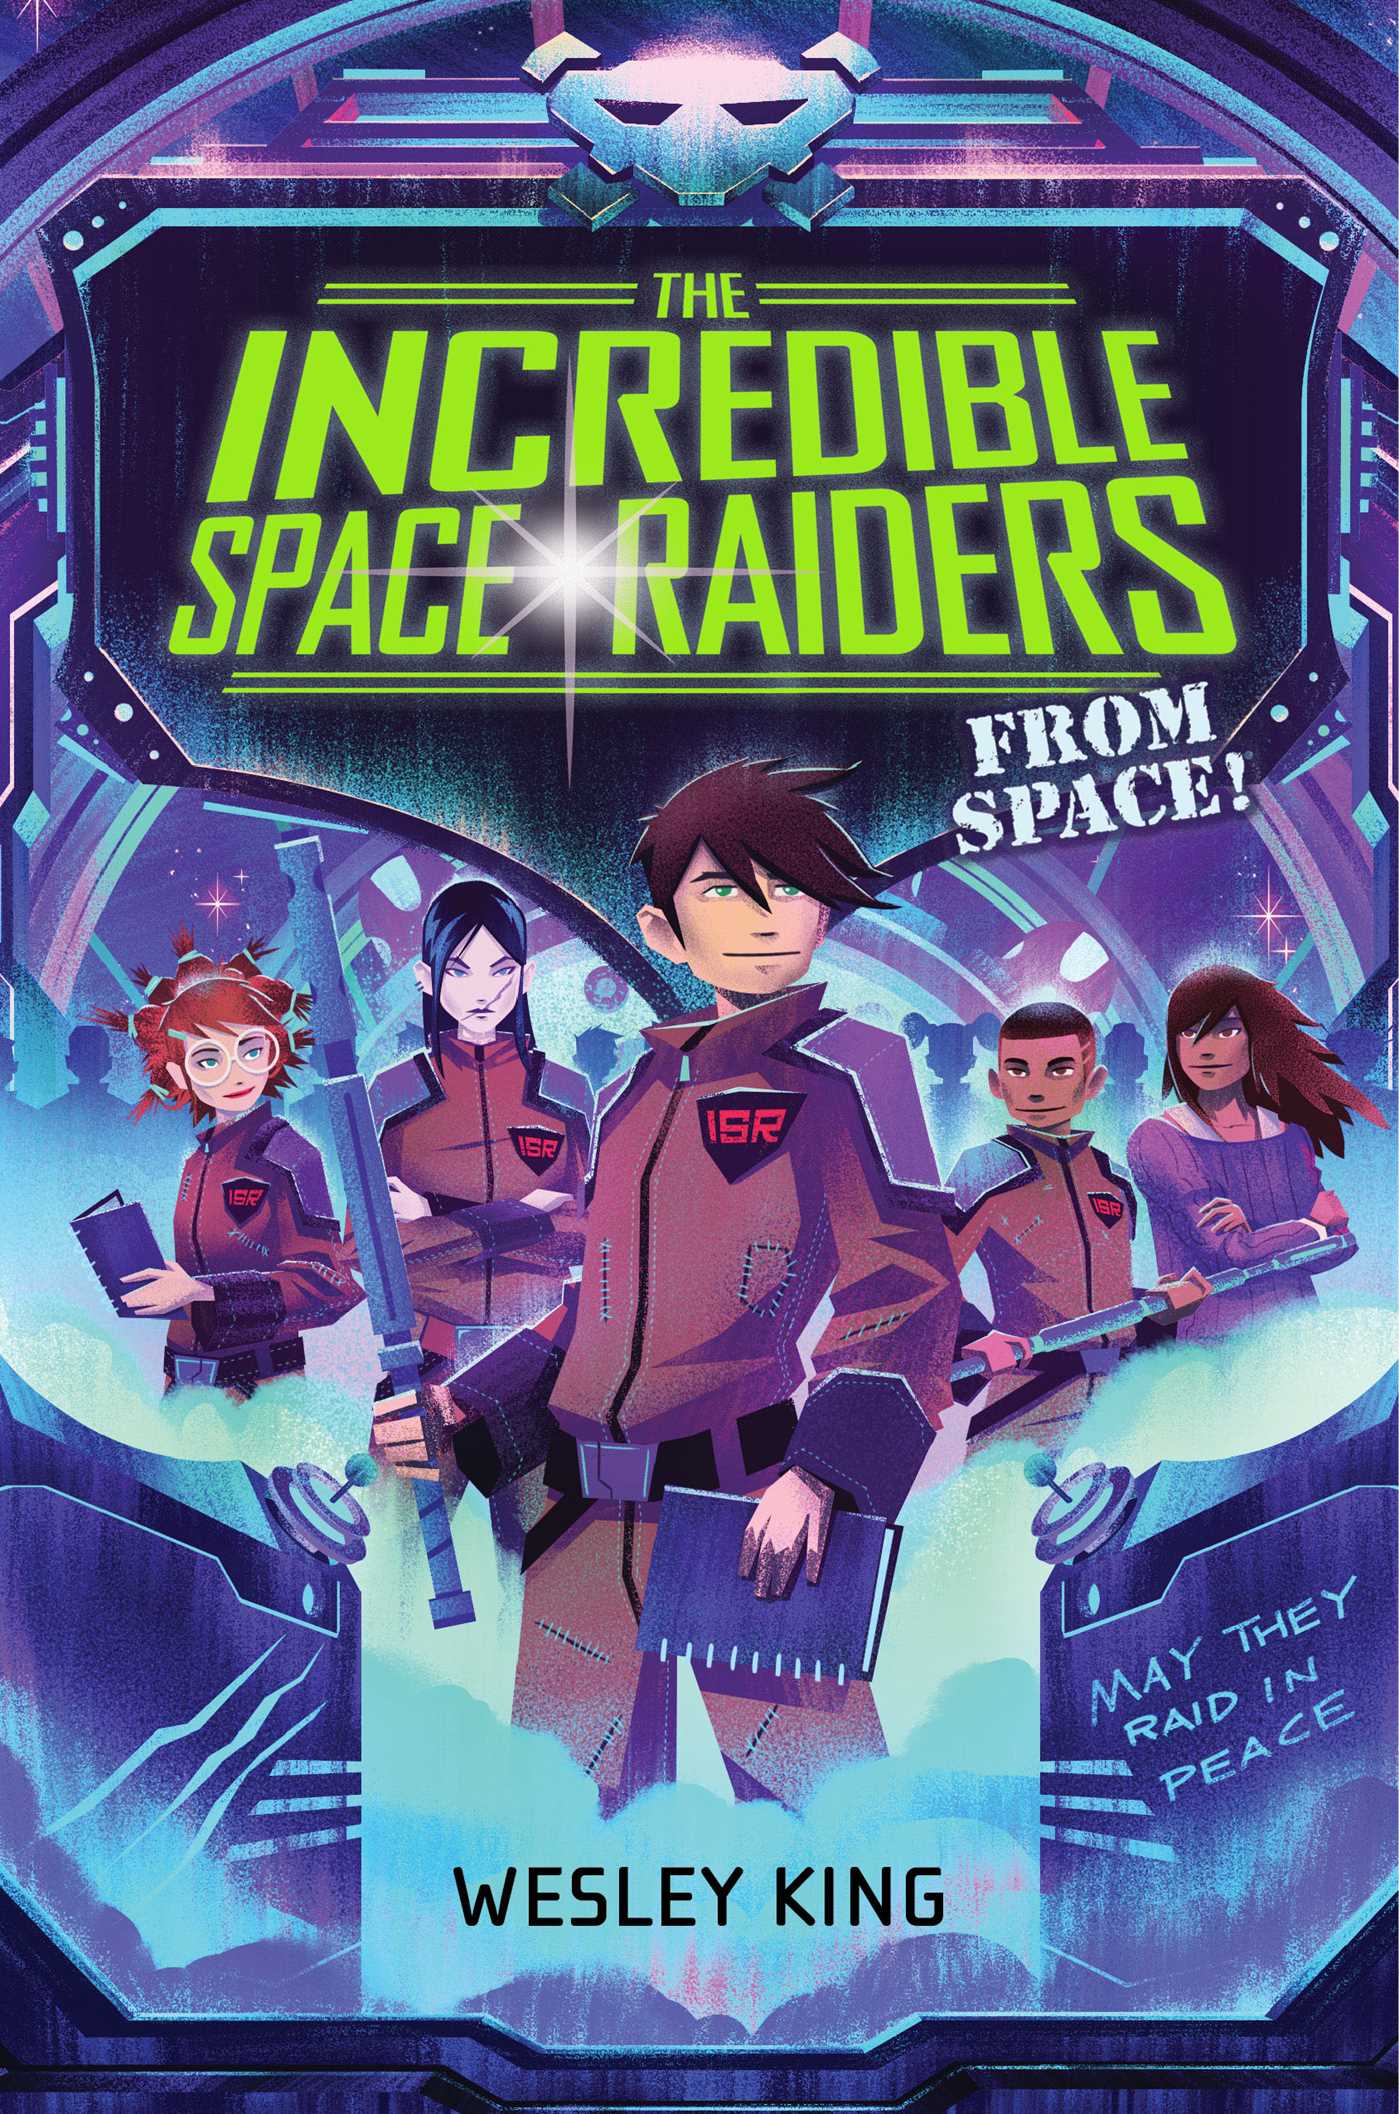 Incredible Space Raiders from Space! (The) | King, Wesley